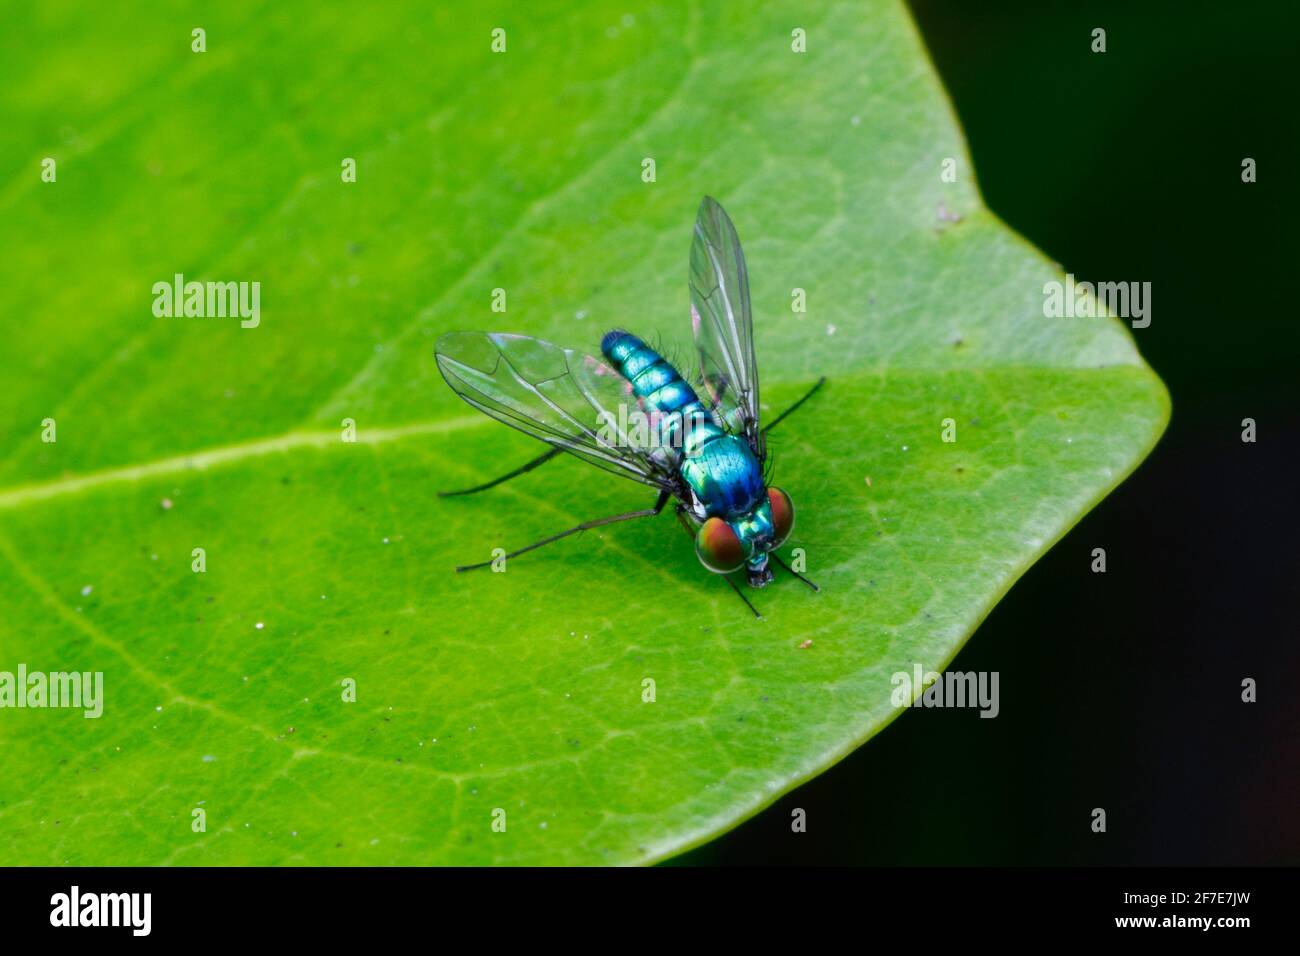 A long-legged fly is foraging on a leaf. Stock Photo